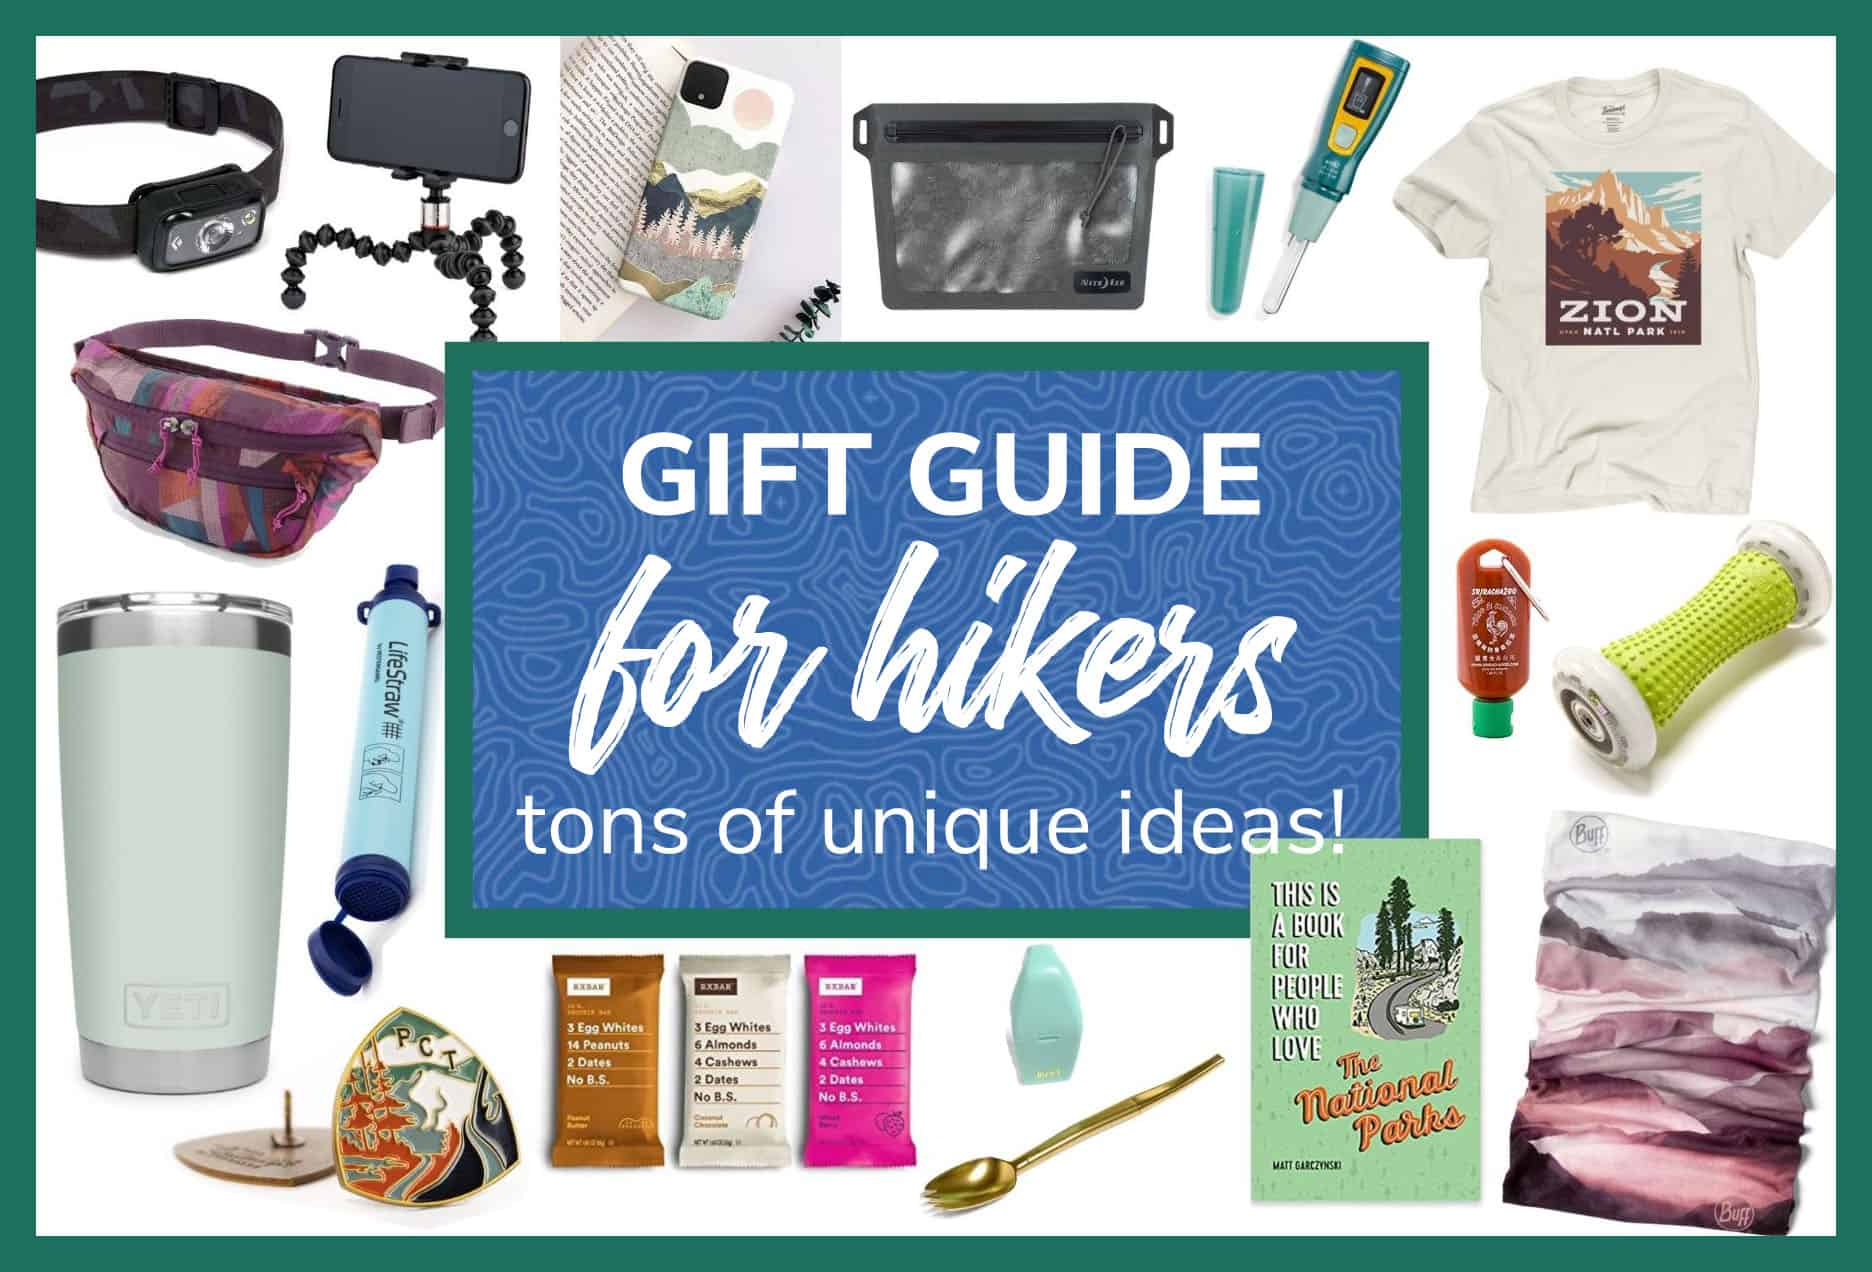 41 Gifts for Hikers that are Practical & Fun! Go Wander Wild